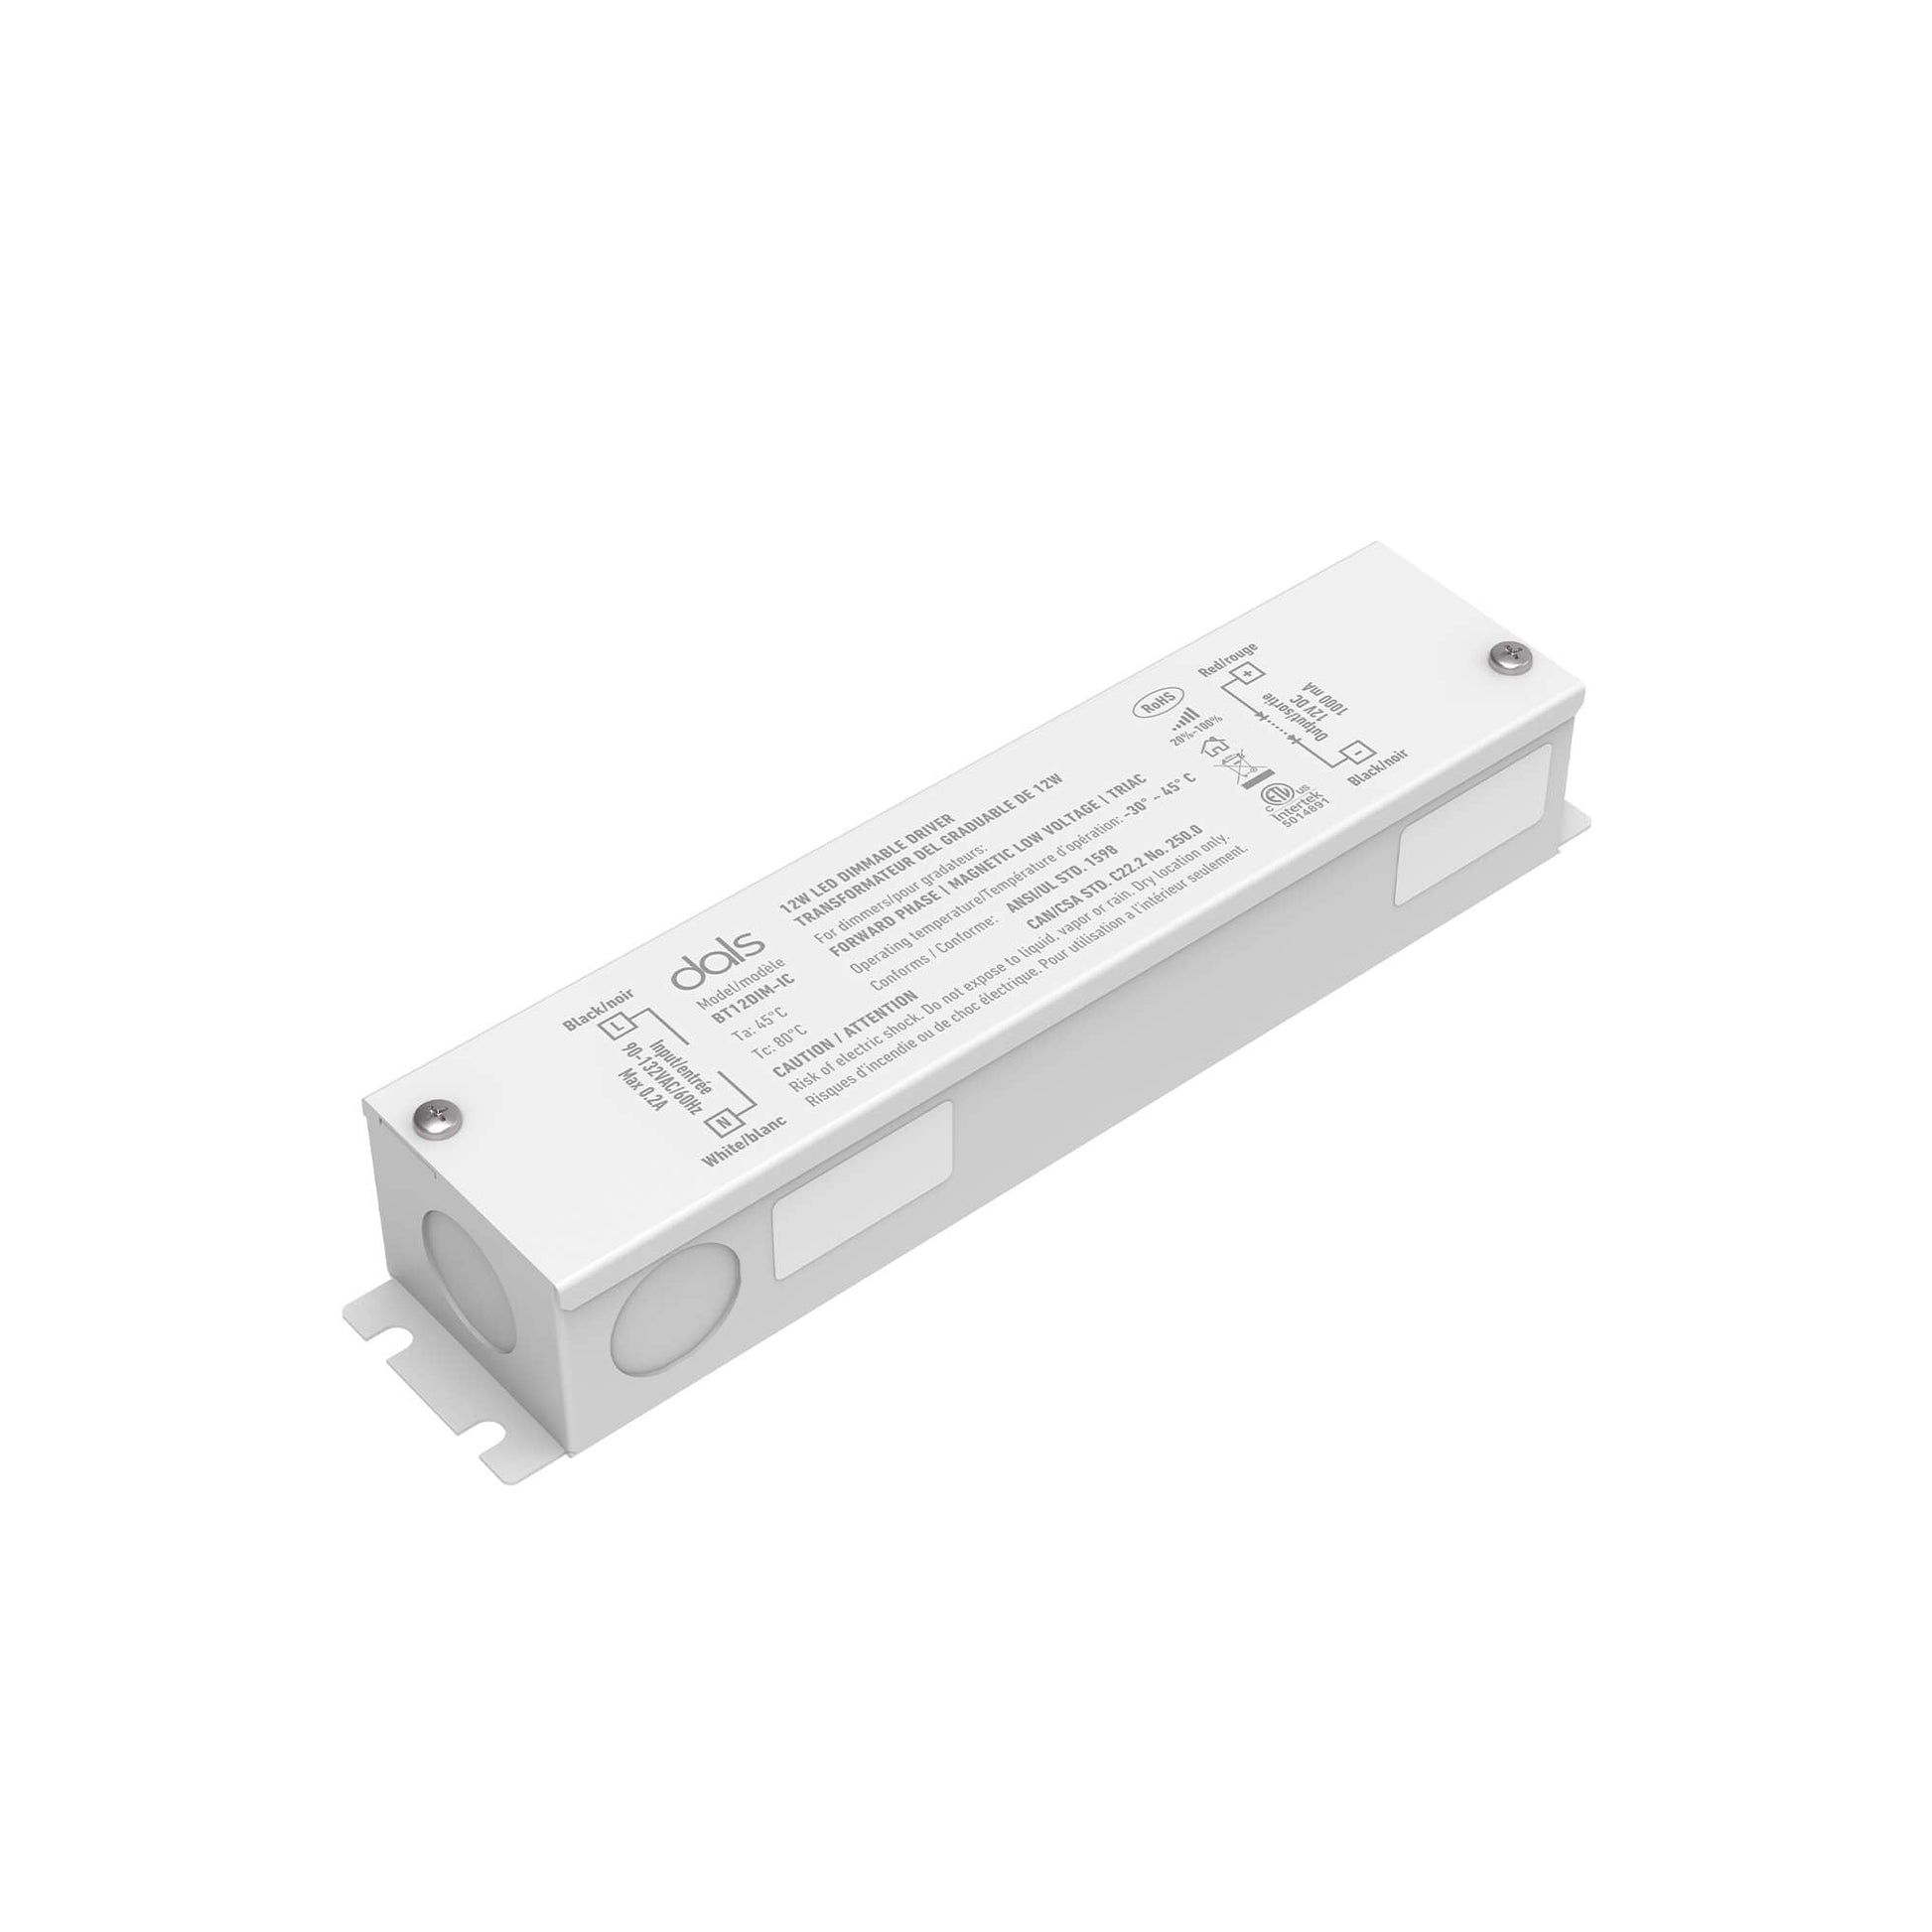 DALS-BT12DIM-ICDals Lighting BTXXDIM-IC 12VDC Dimmable LED Driver